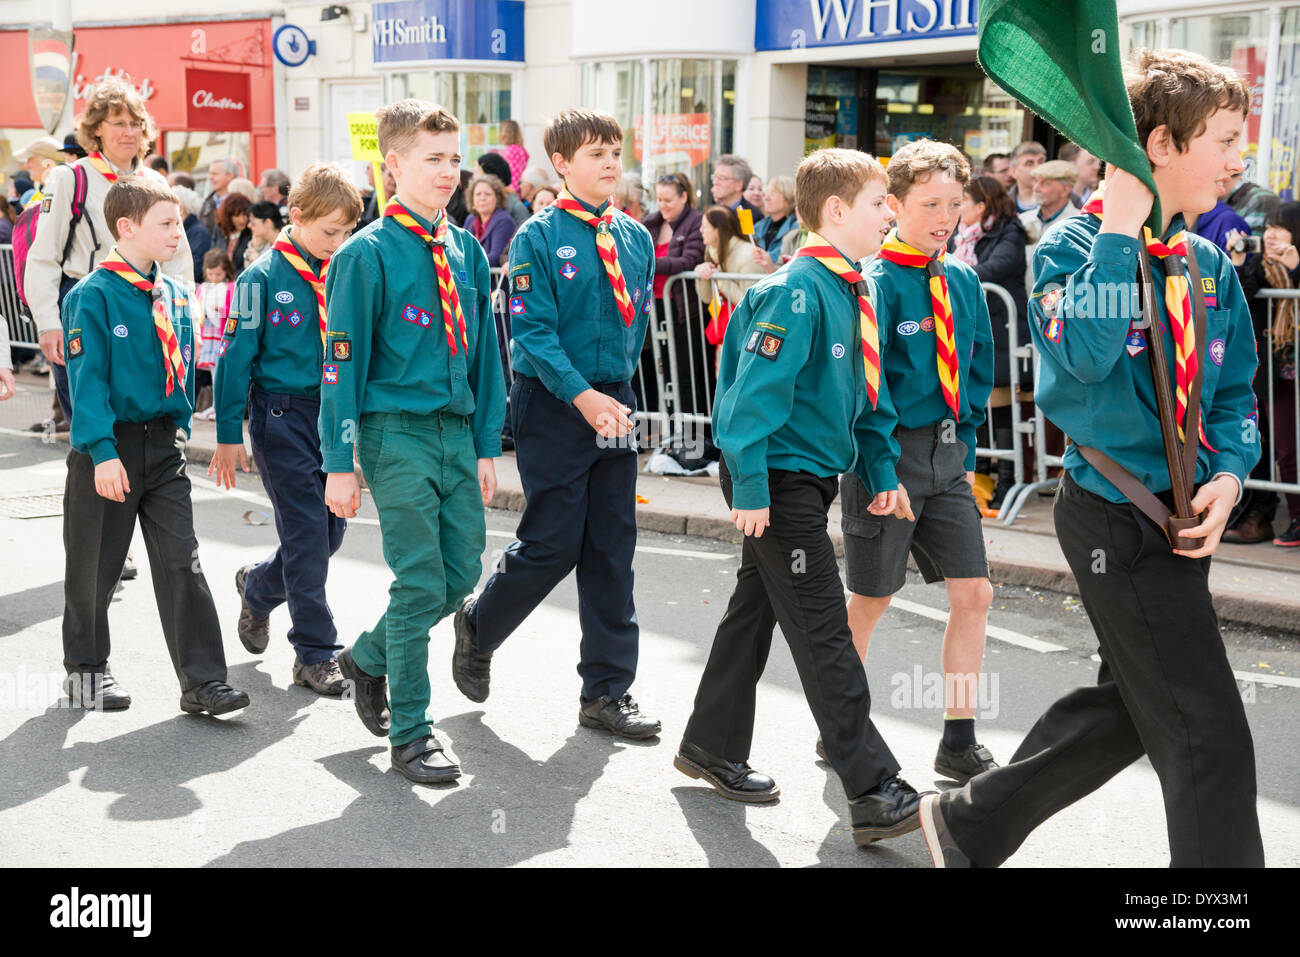 Stratford-upon-Avon, UK , 26th Apr, 2014. Shakespeare Birthday Celebrations 2014 – William Shakespeare’s 450th Birthday in Stratford upon Avon, UK. Scouts taking part in the parade. Credit:  Robert Convery/Alamy Live News Stock Photo